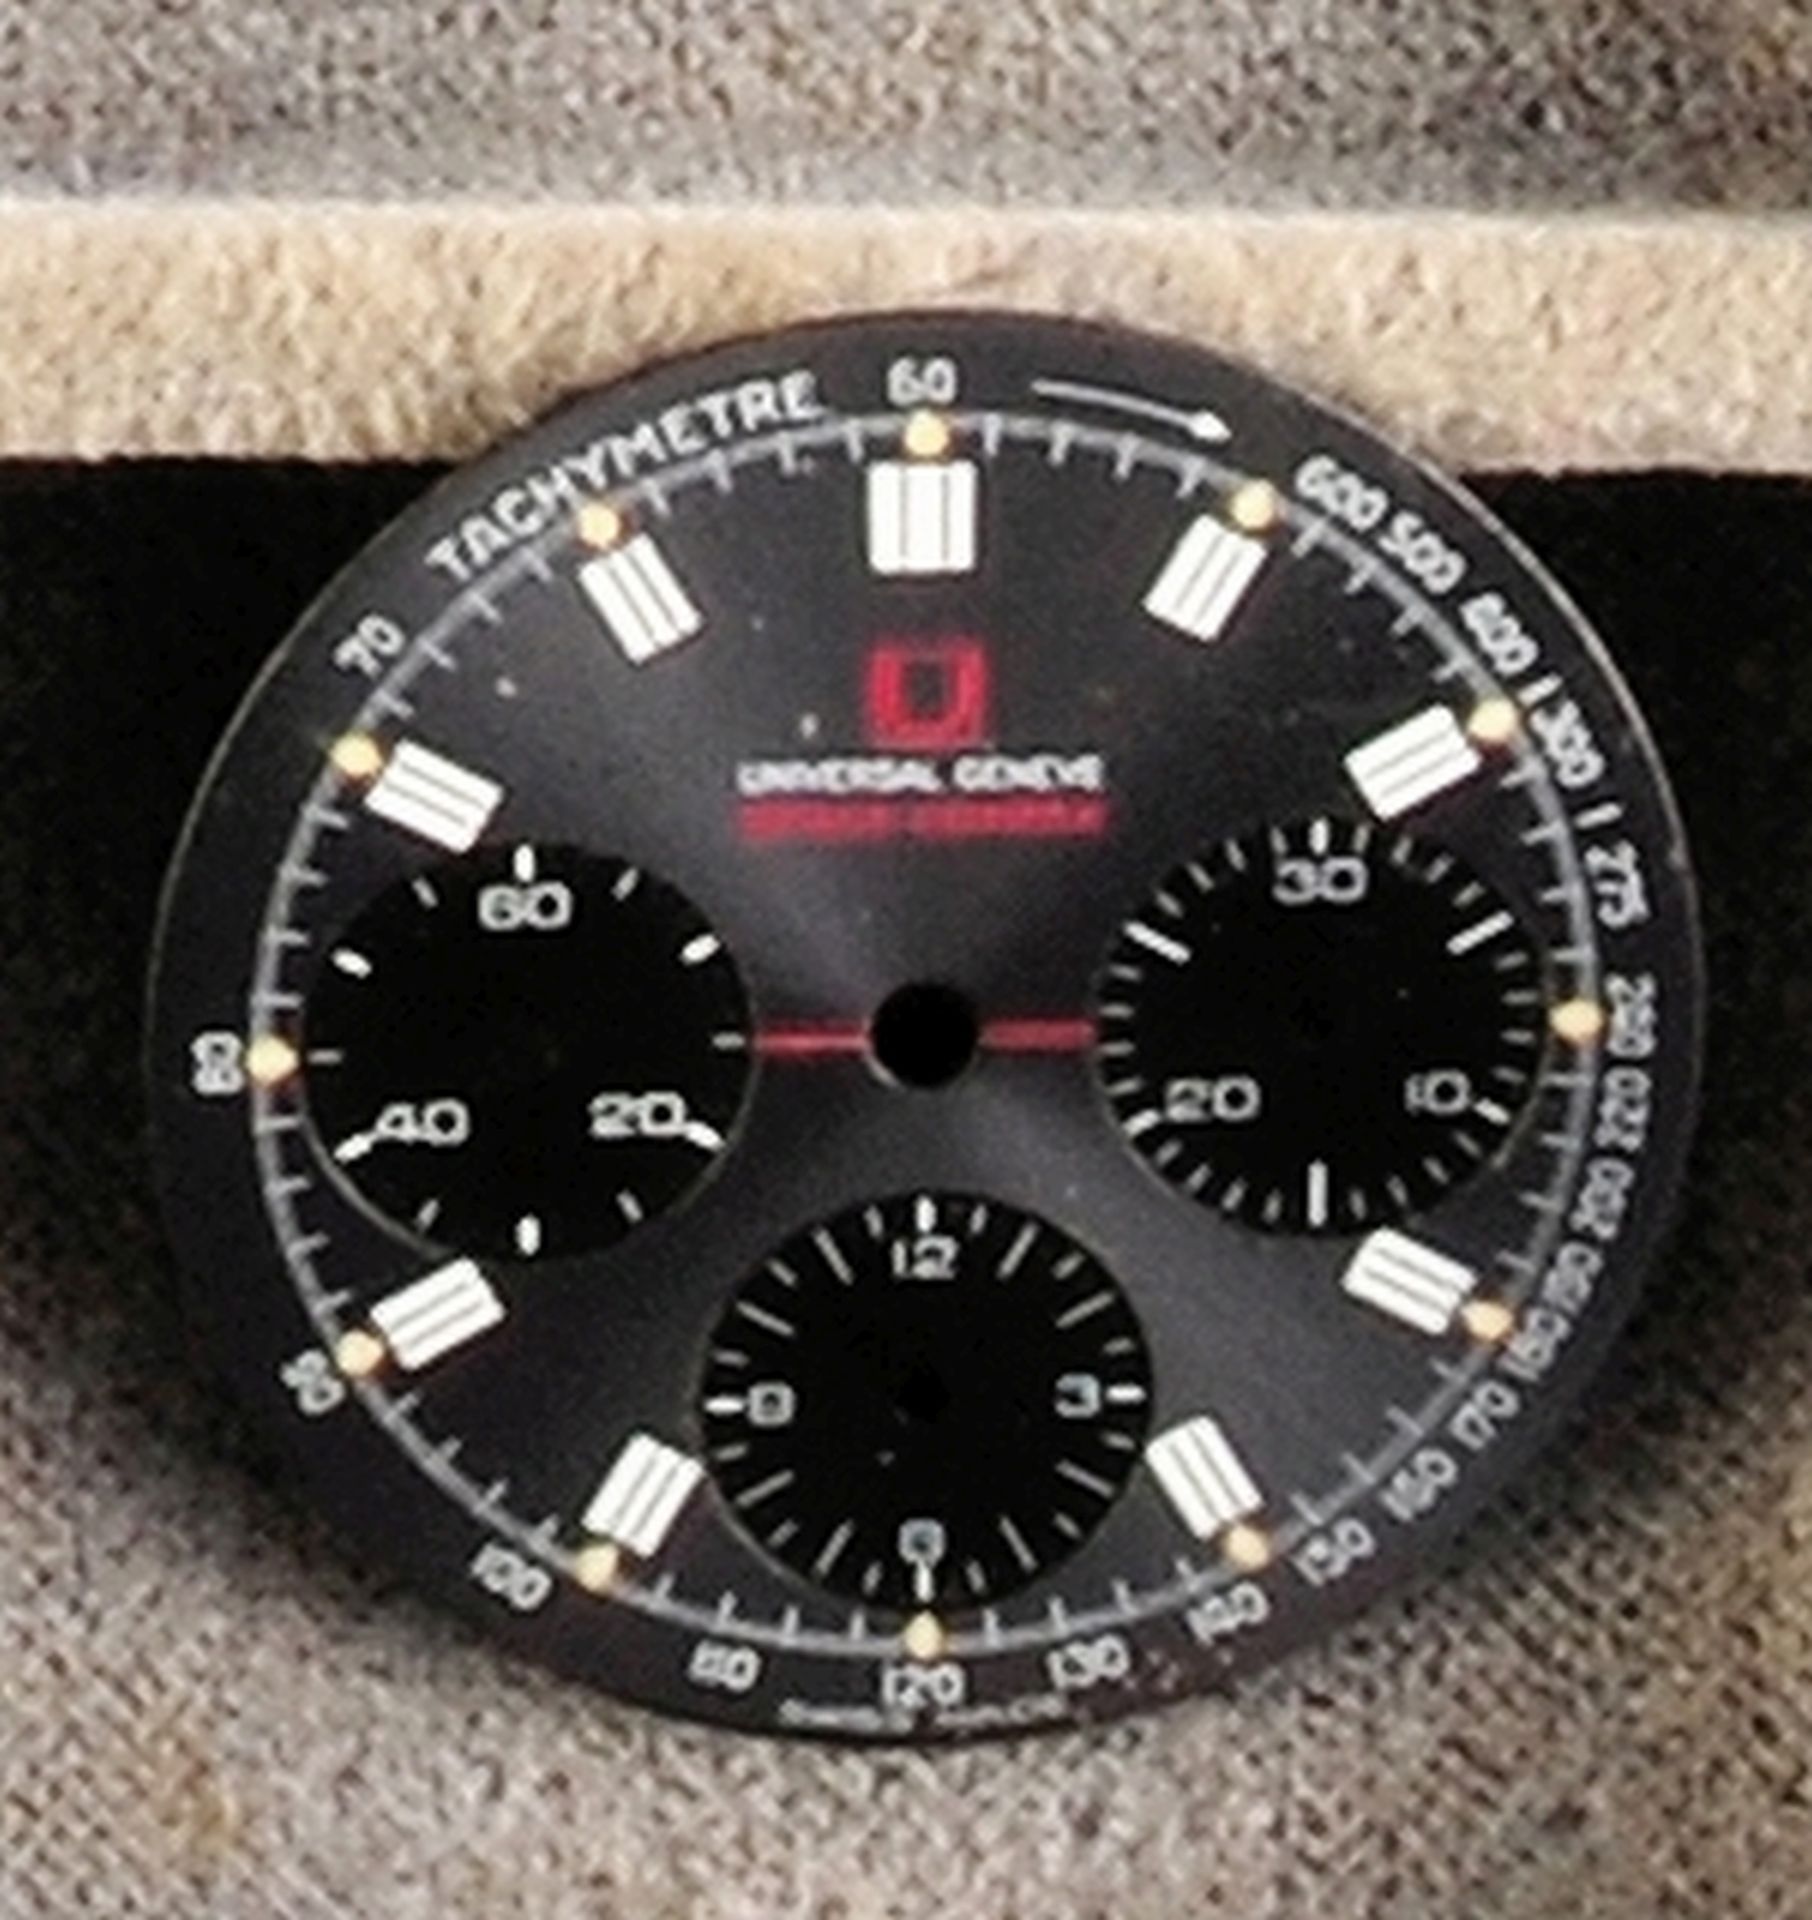 Universal Space Compax Wristwatch Chronograph Dial, 